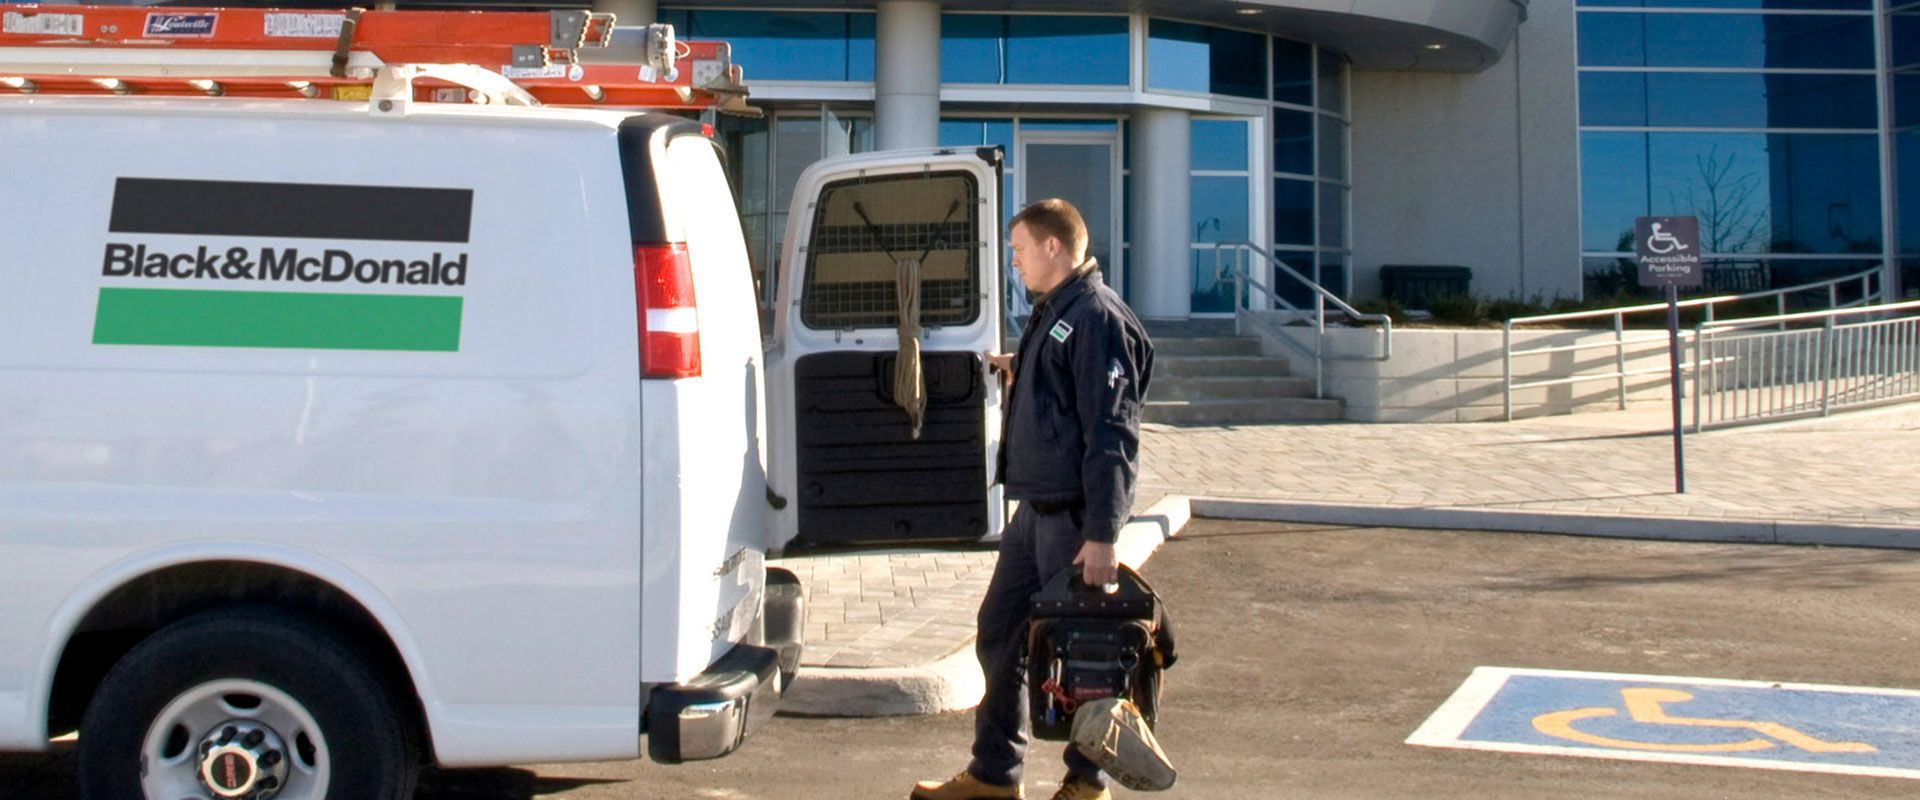 B&M service technician loading the service van with equipment.